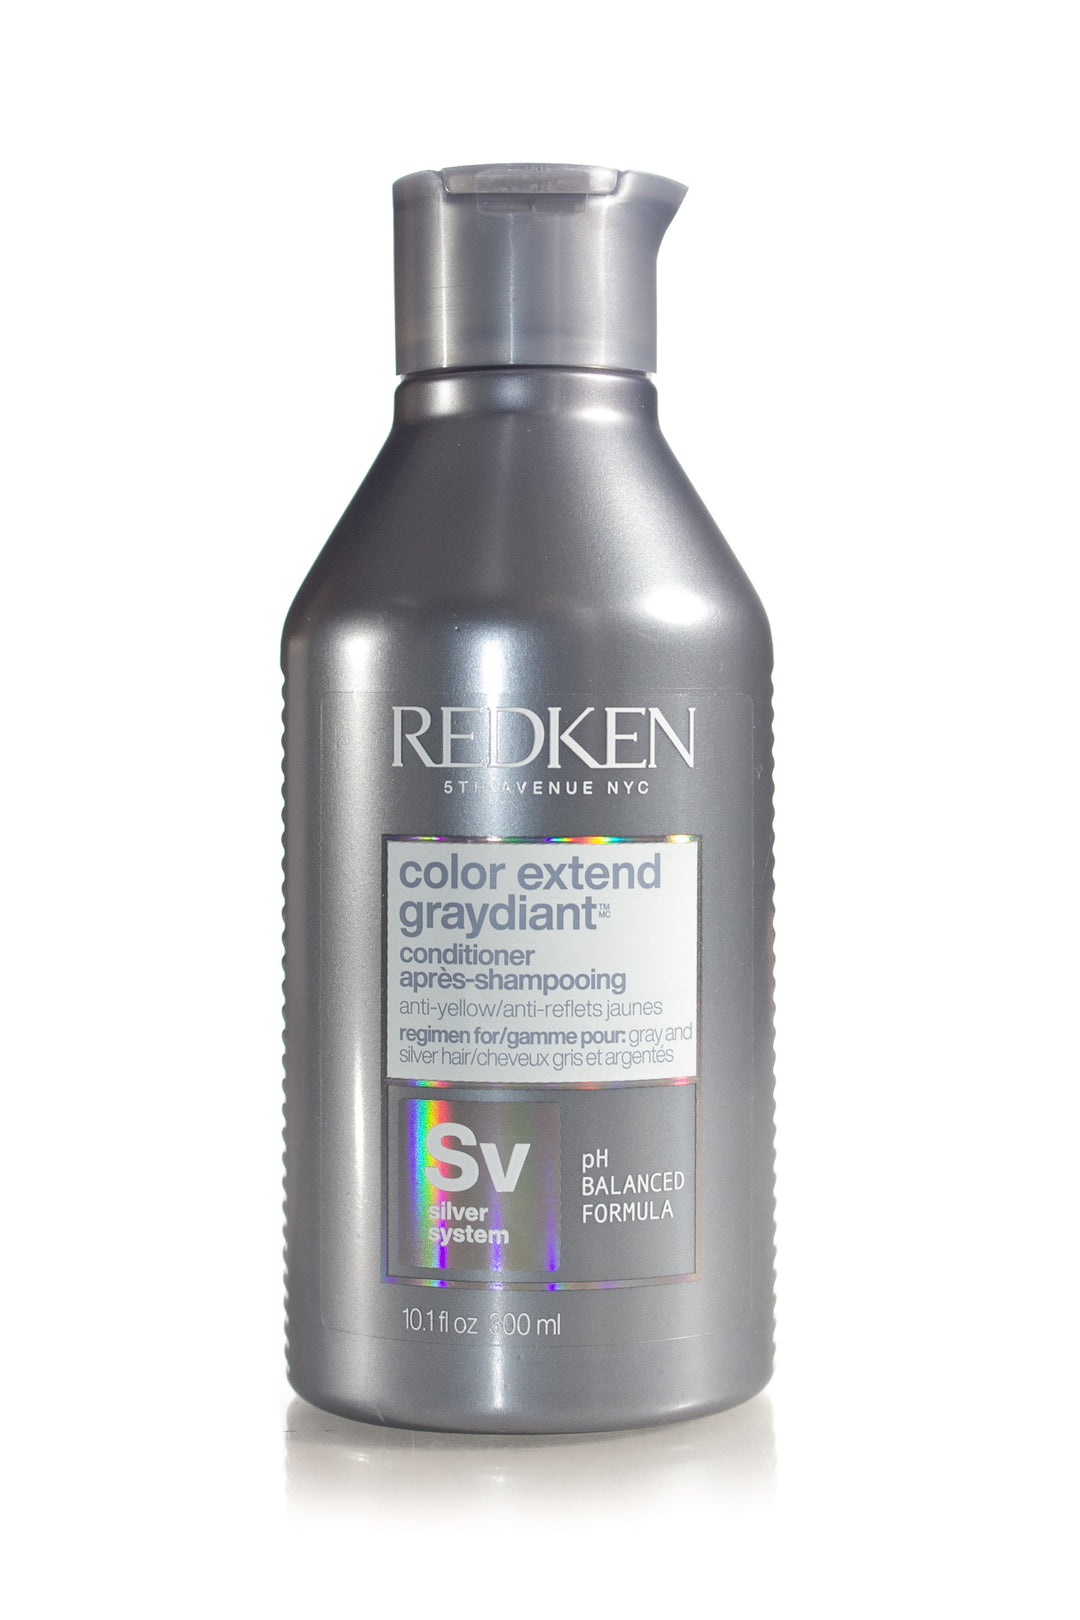 A silver toning conditioner that deposits custom silver pigments to progressively brighten and tone grey, silver, and light blonde hair color.